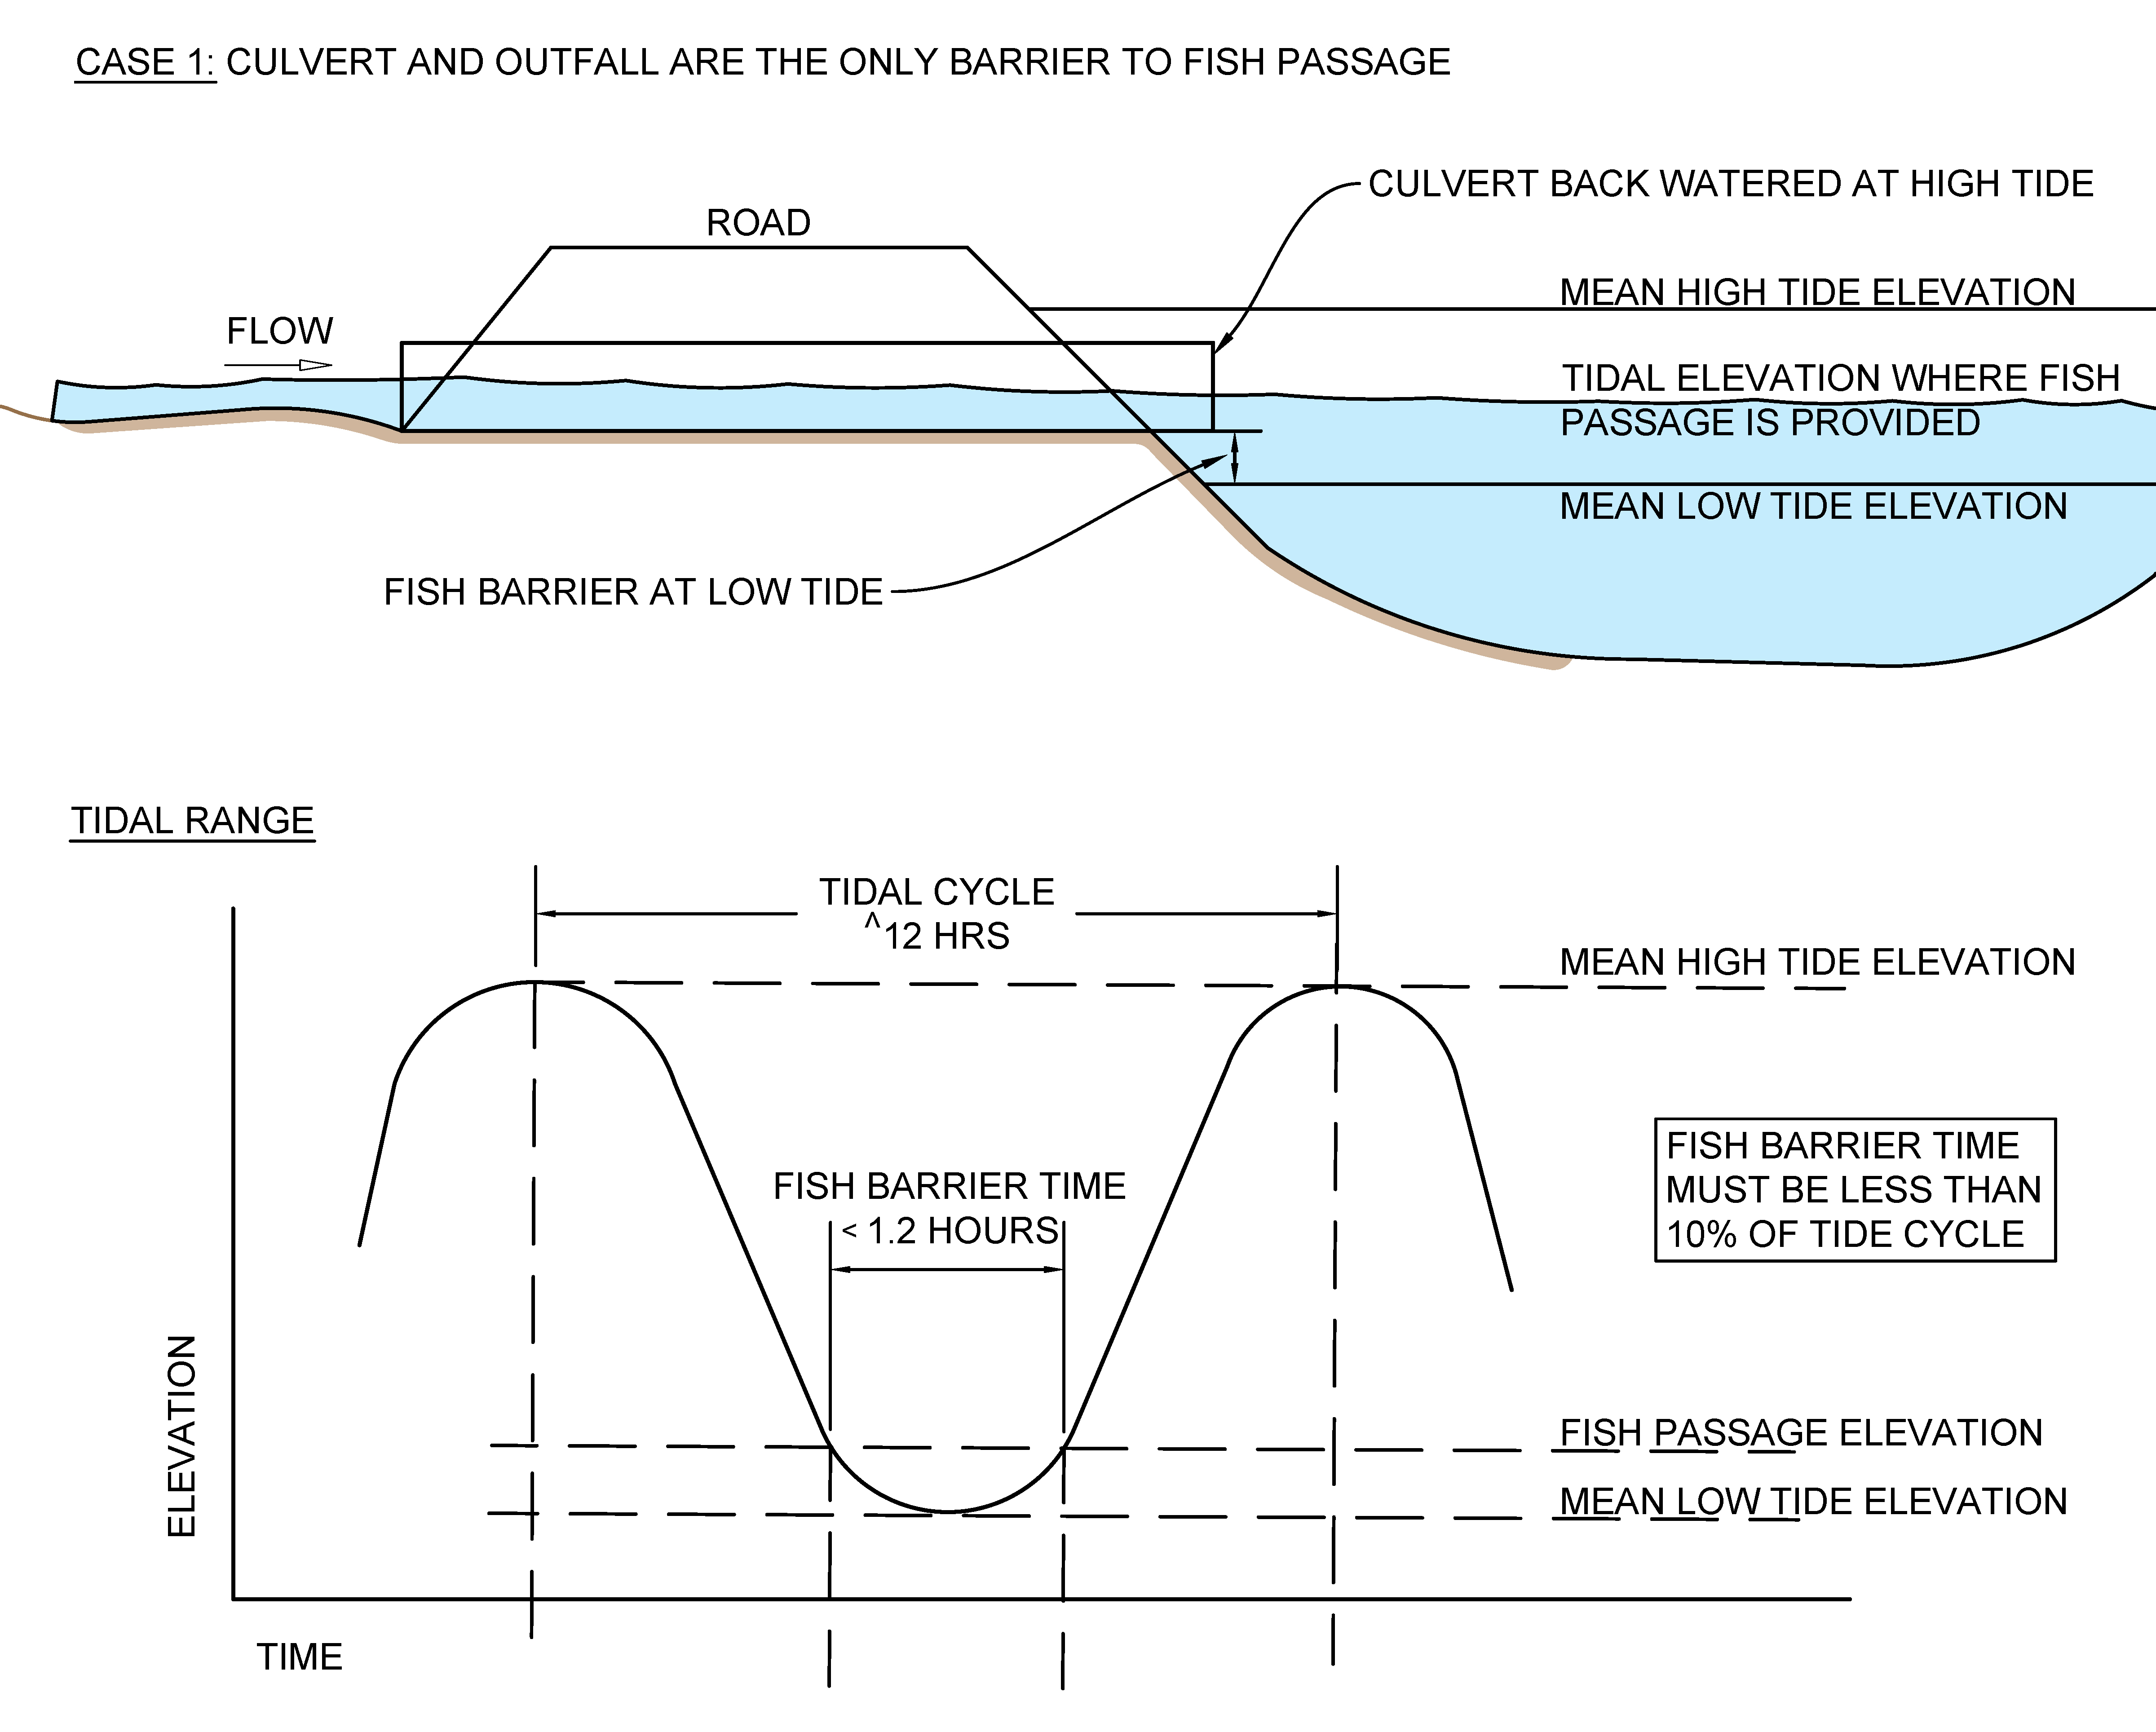 two diagrams showing a road in tidal area and fish barrier time in relation to tidal cycle